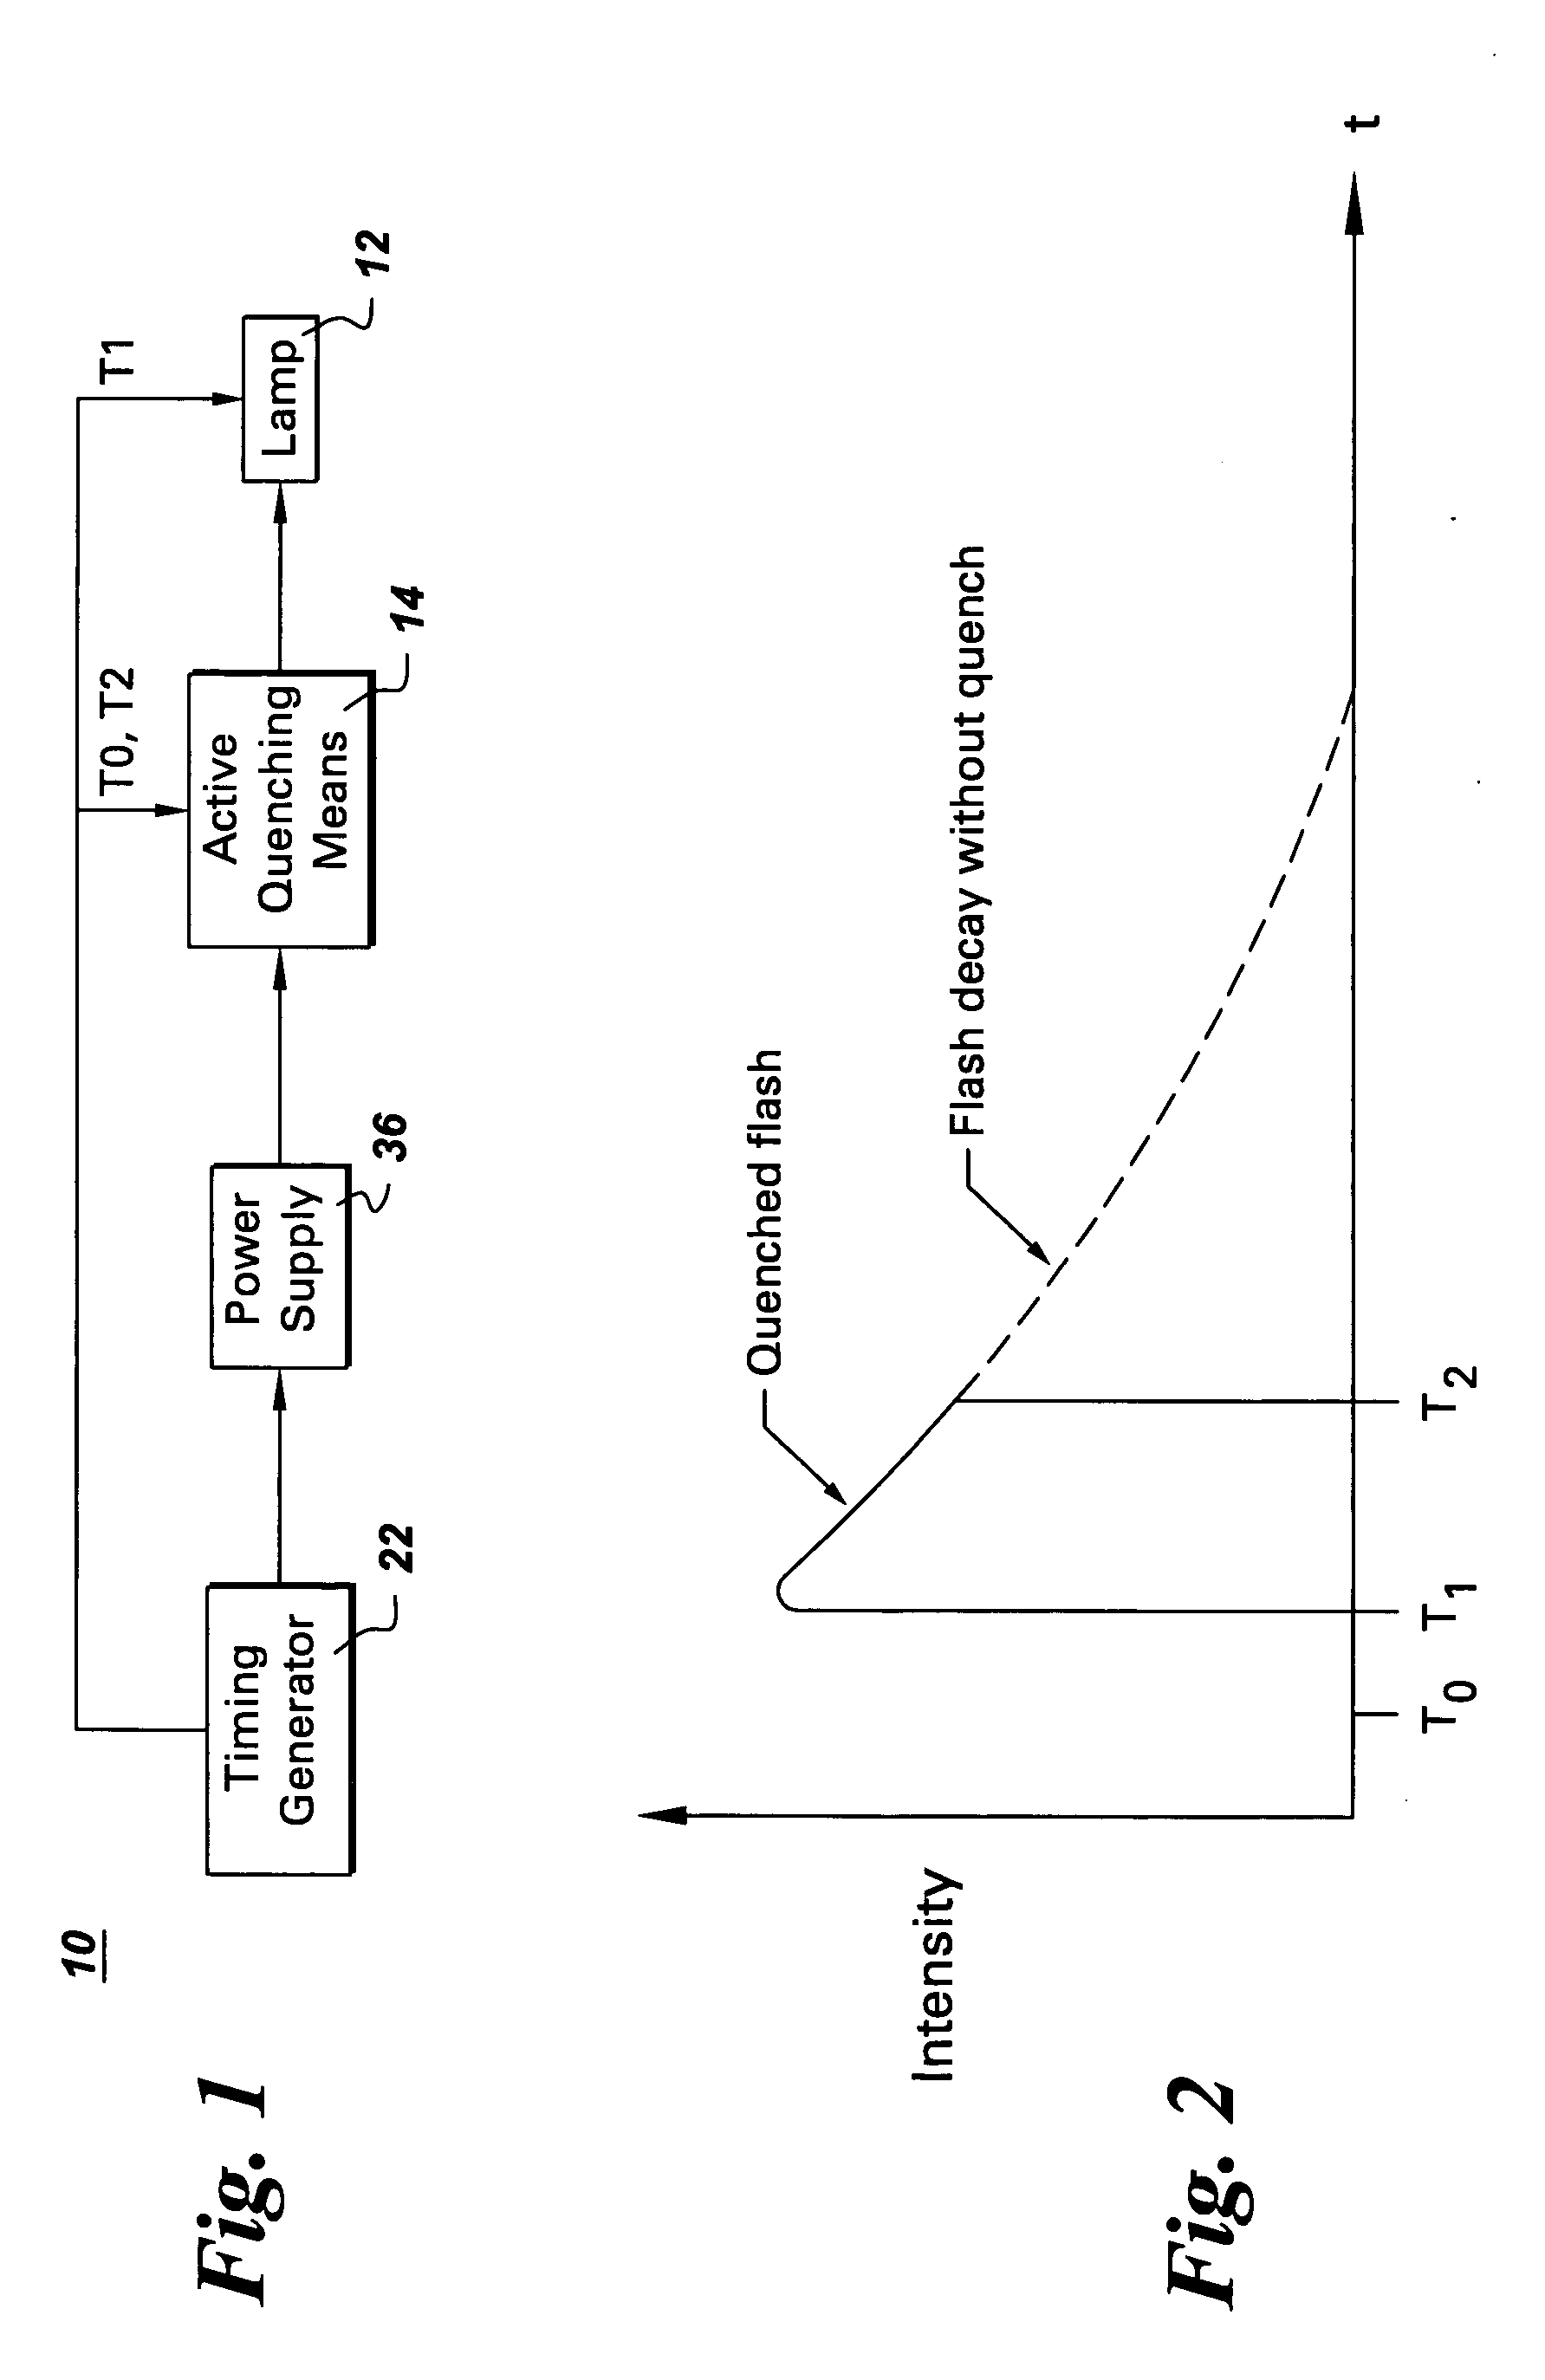 Actively quenched lamp, infrared thermography imaging system, and method for actively controlling flash duration